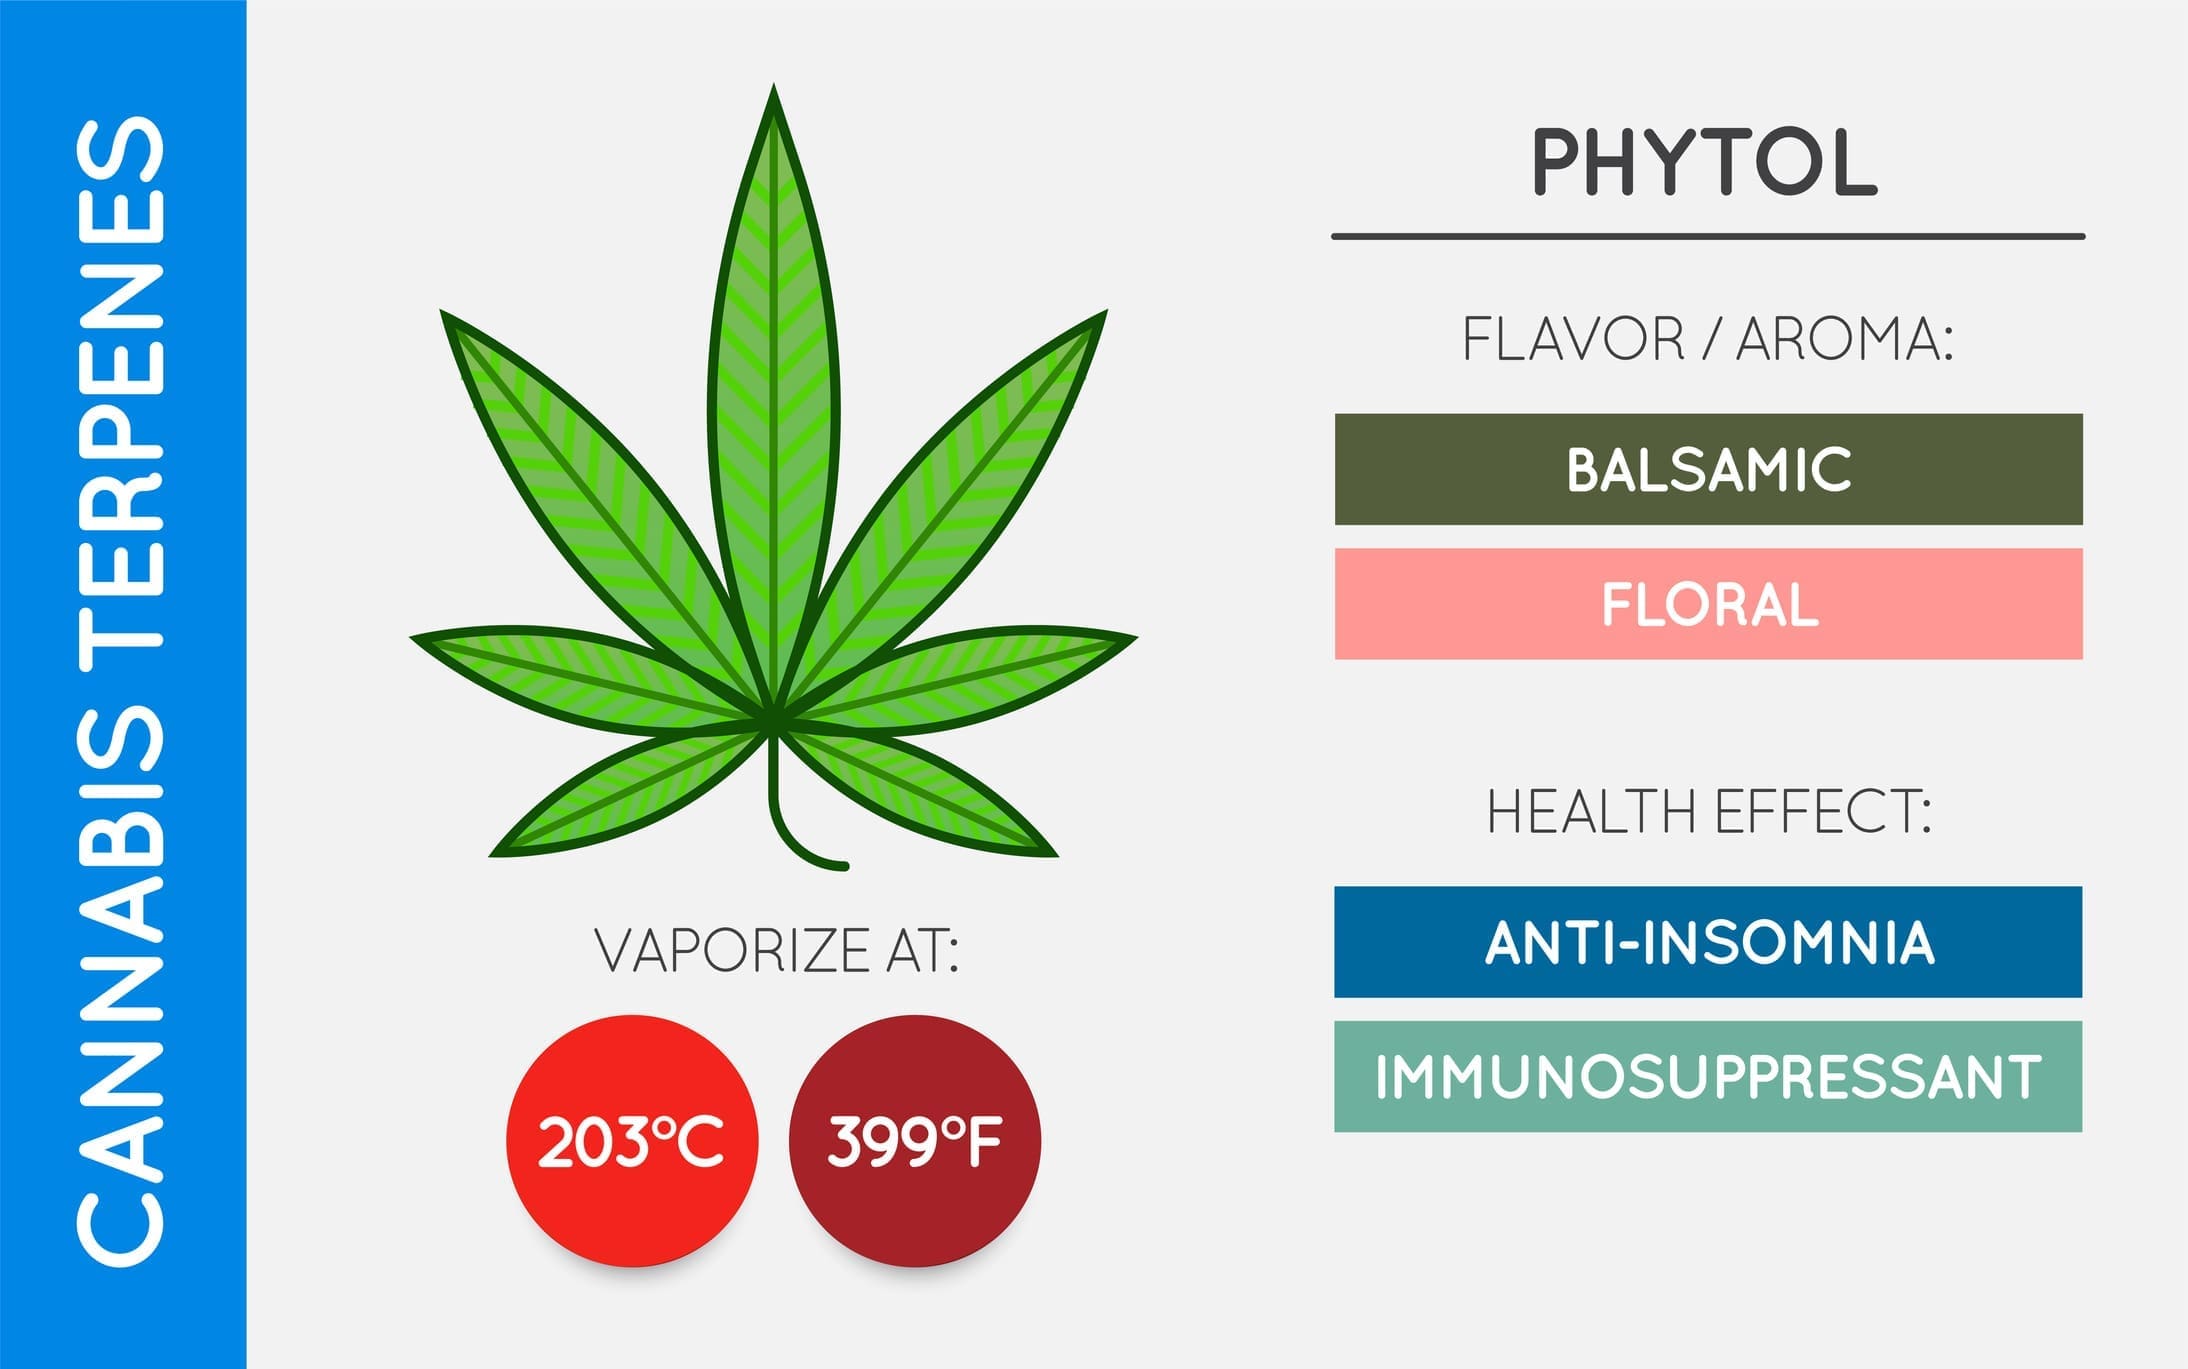 Cannabis Terpene Guide Information Chart Aroma And Flavor With Health Benefits And Vaporize Temperature Vector